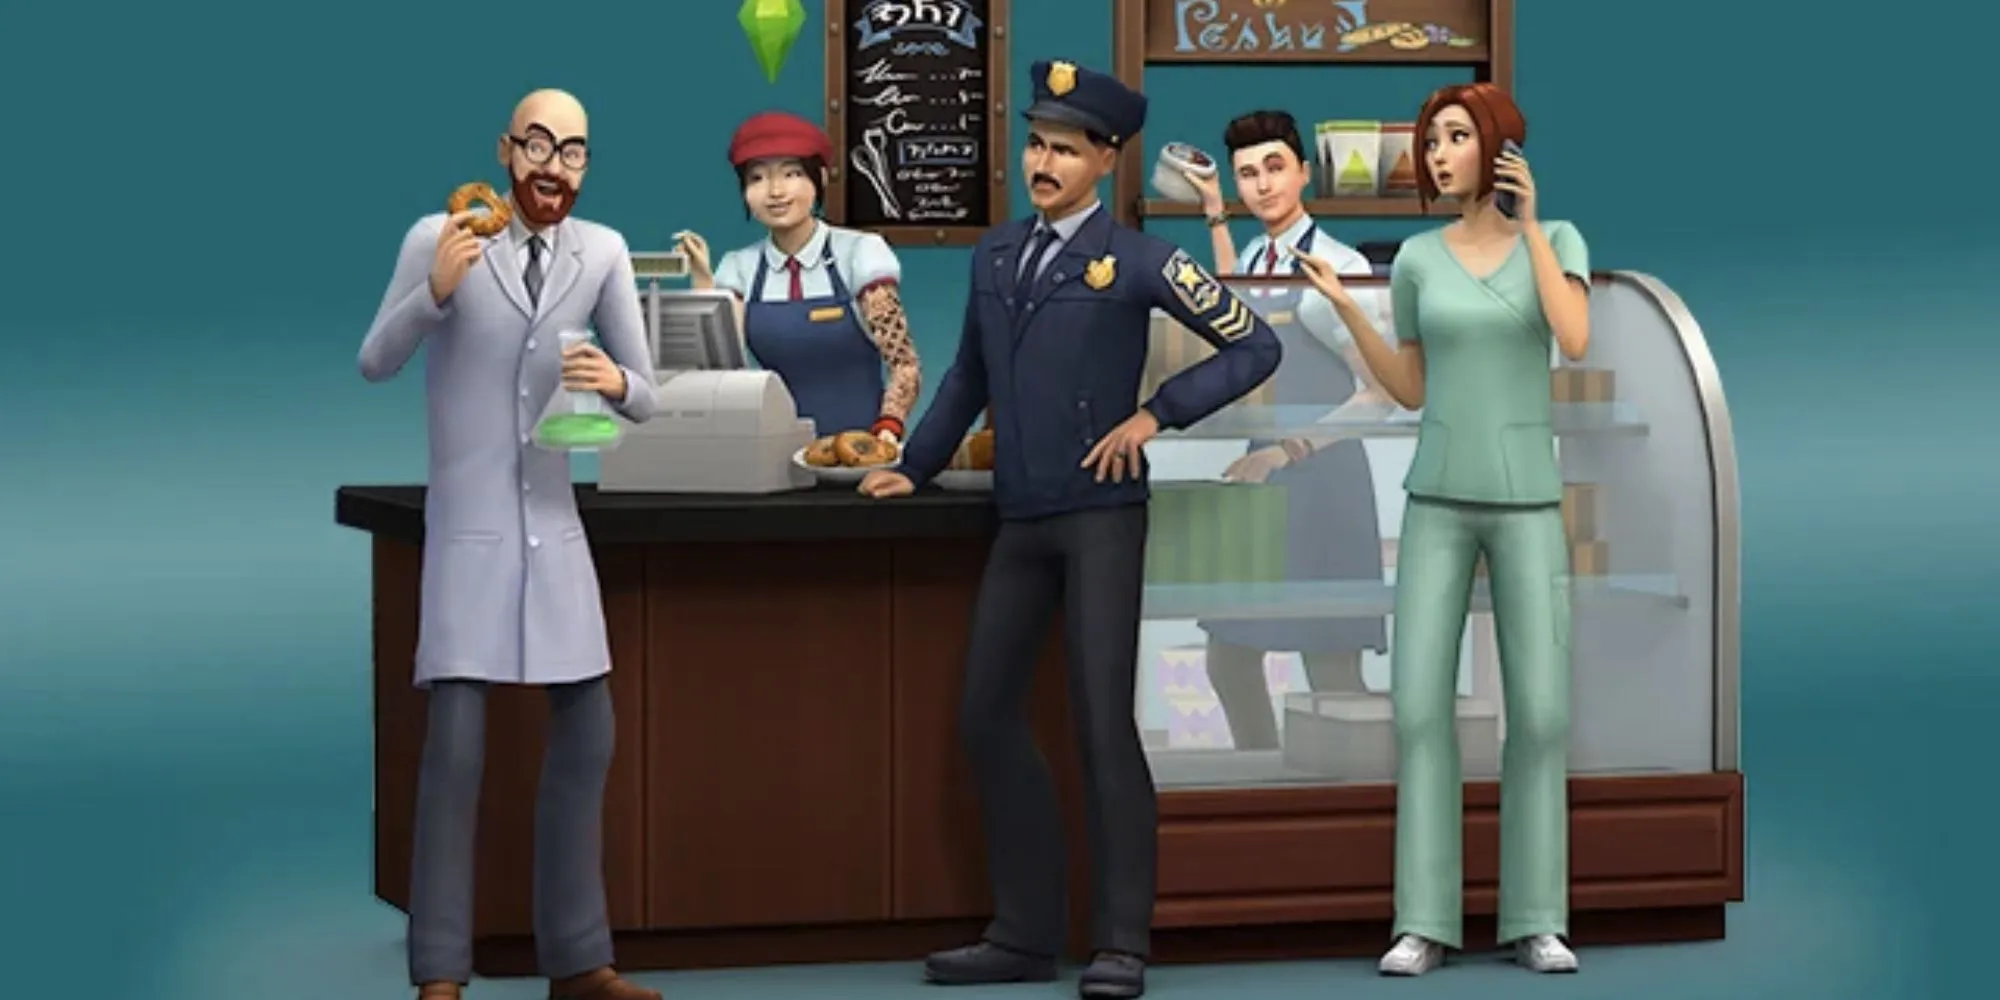 sims 4調理技術 Get To Work